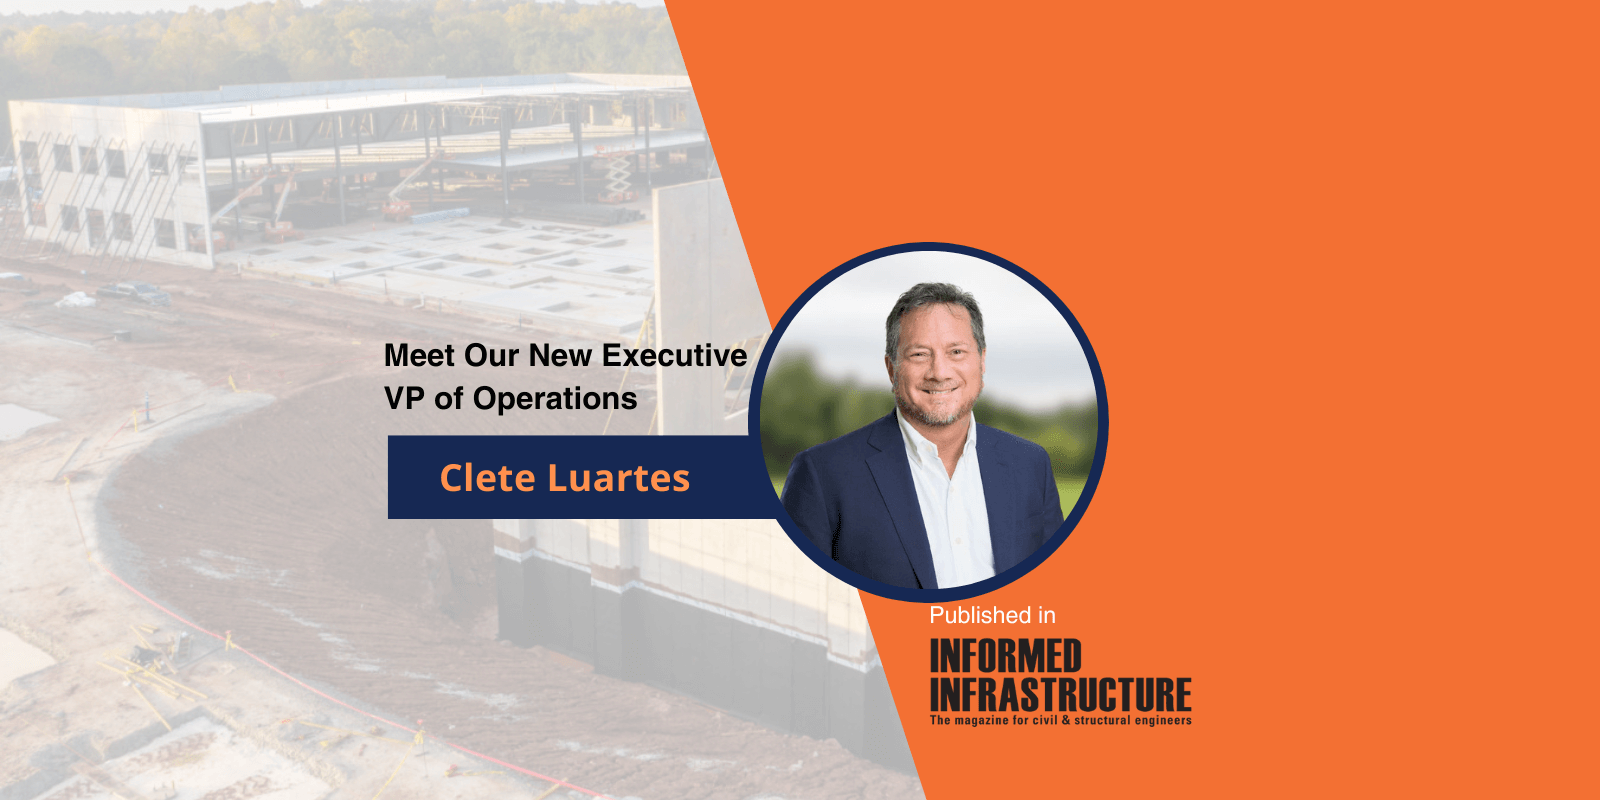 Featured image for “T&T Construction Management Group, Inc. Welcomes Clete Luartes as Executive Vice President of Operations, Published in Informed Infrastructure”